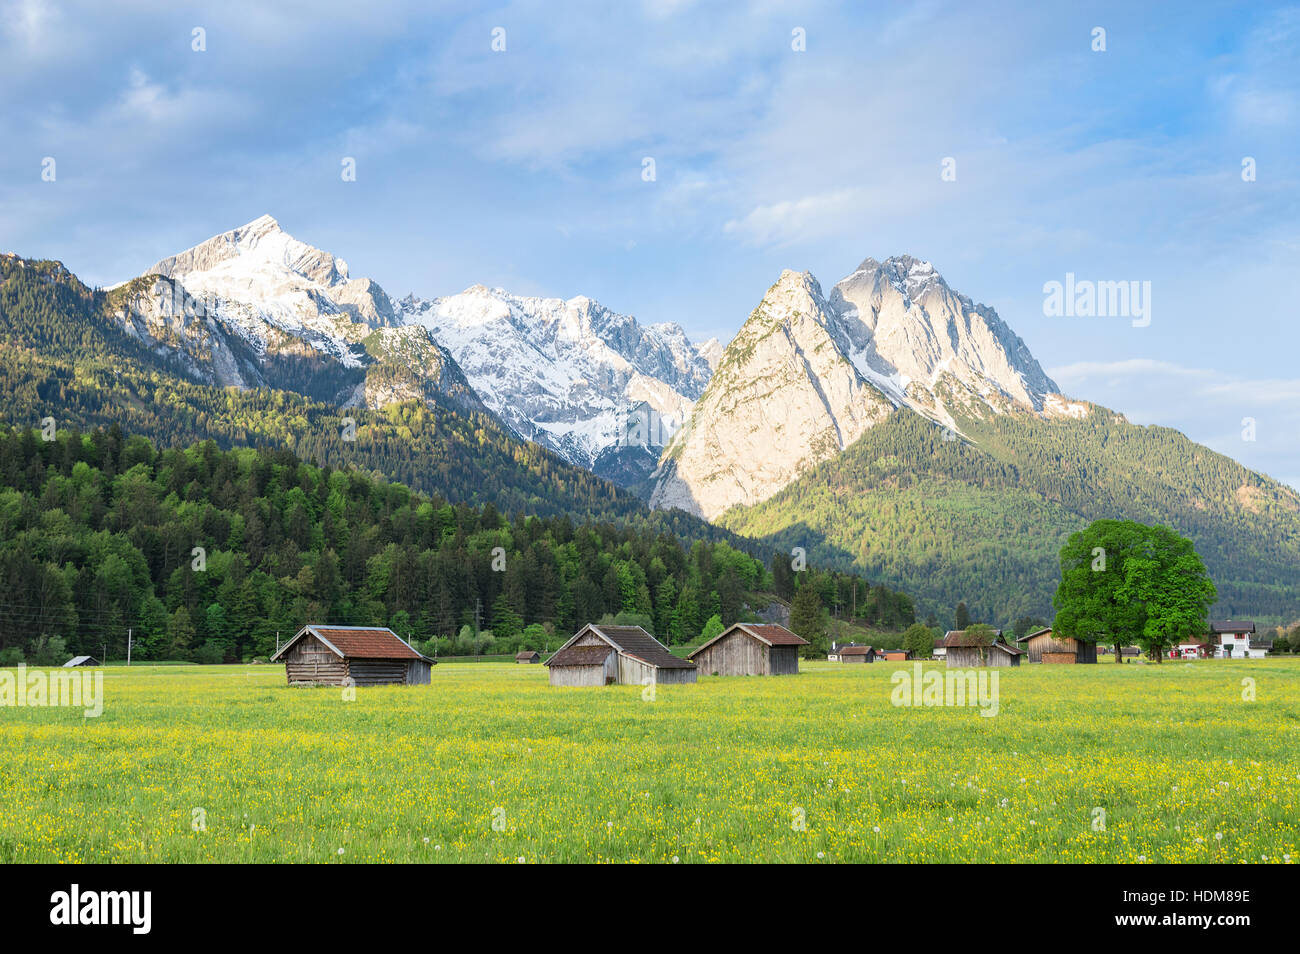 Bavarian Serene Landscape With Snowy Alps Mountains Ridge And Spring